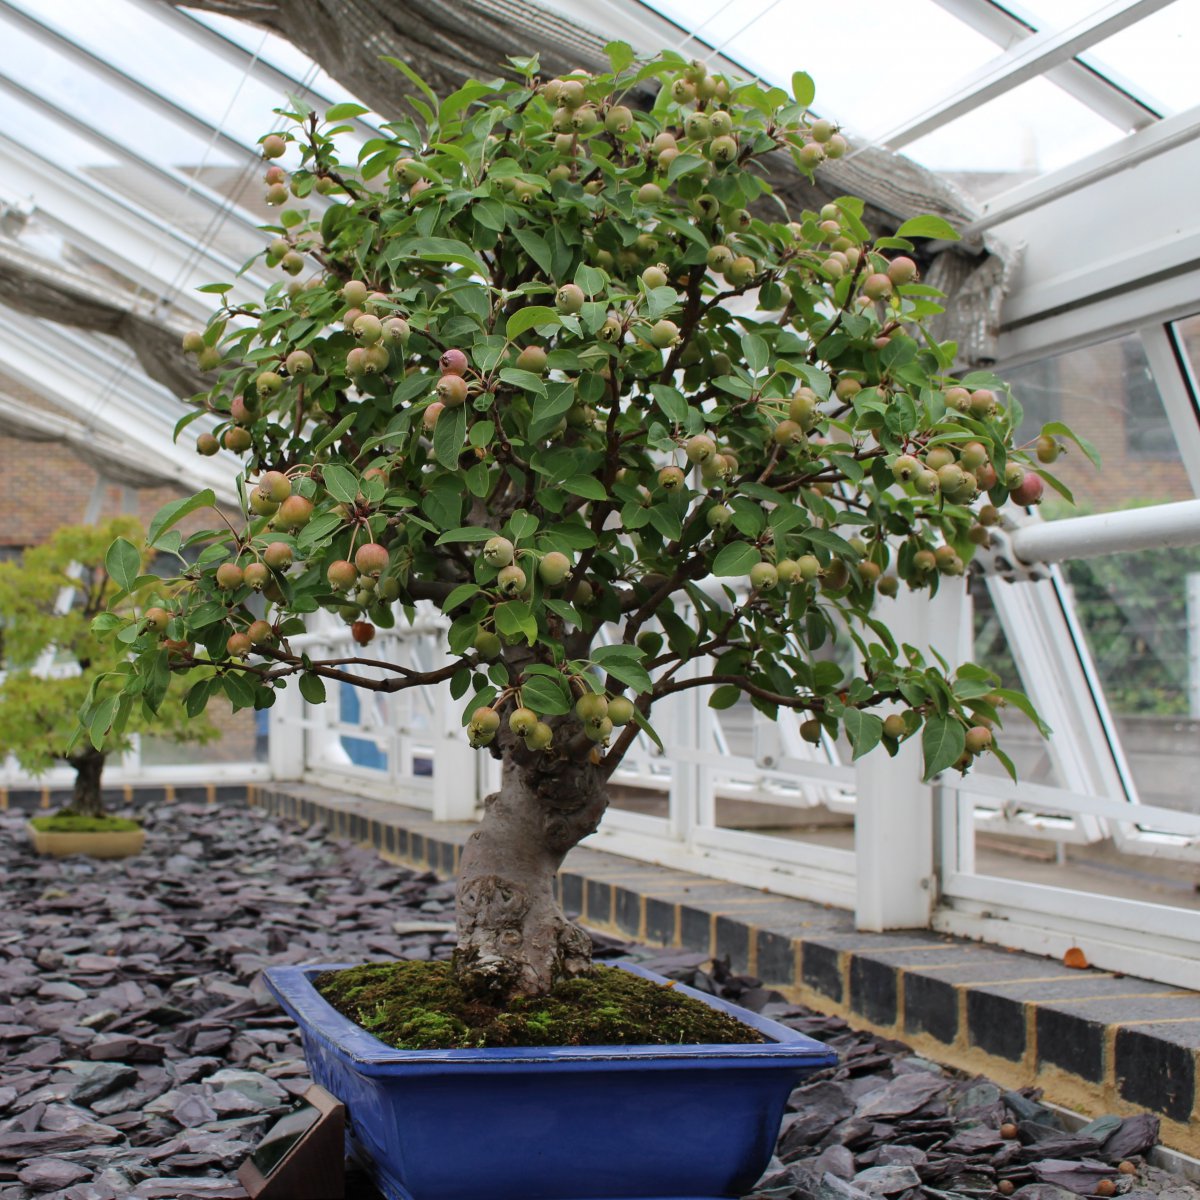 Pictures of bonsai with spreading branches and leaves